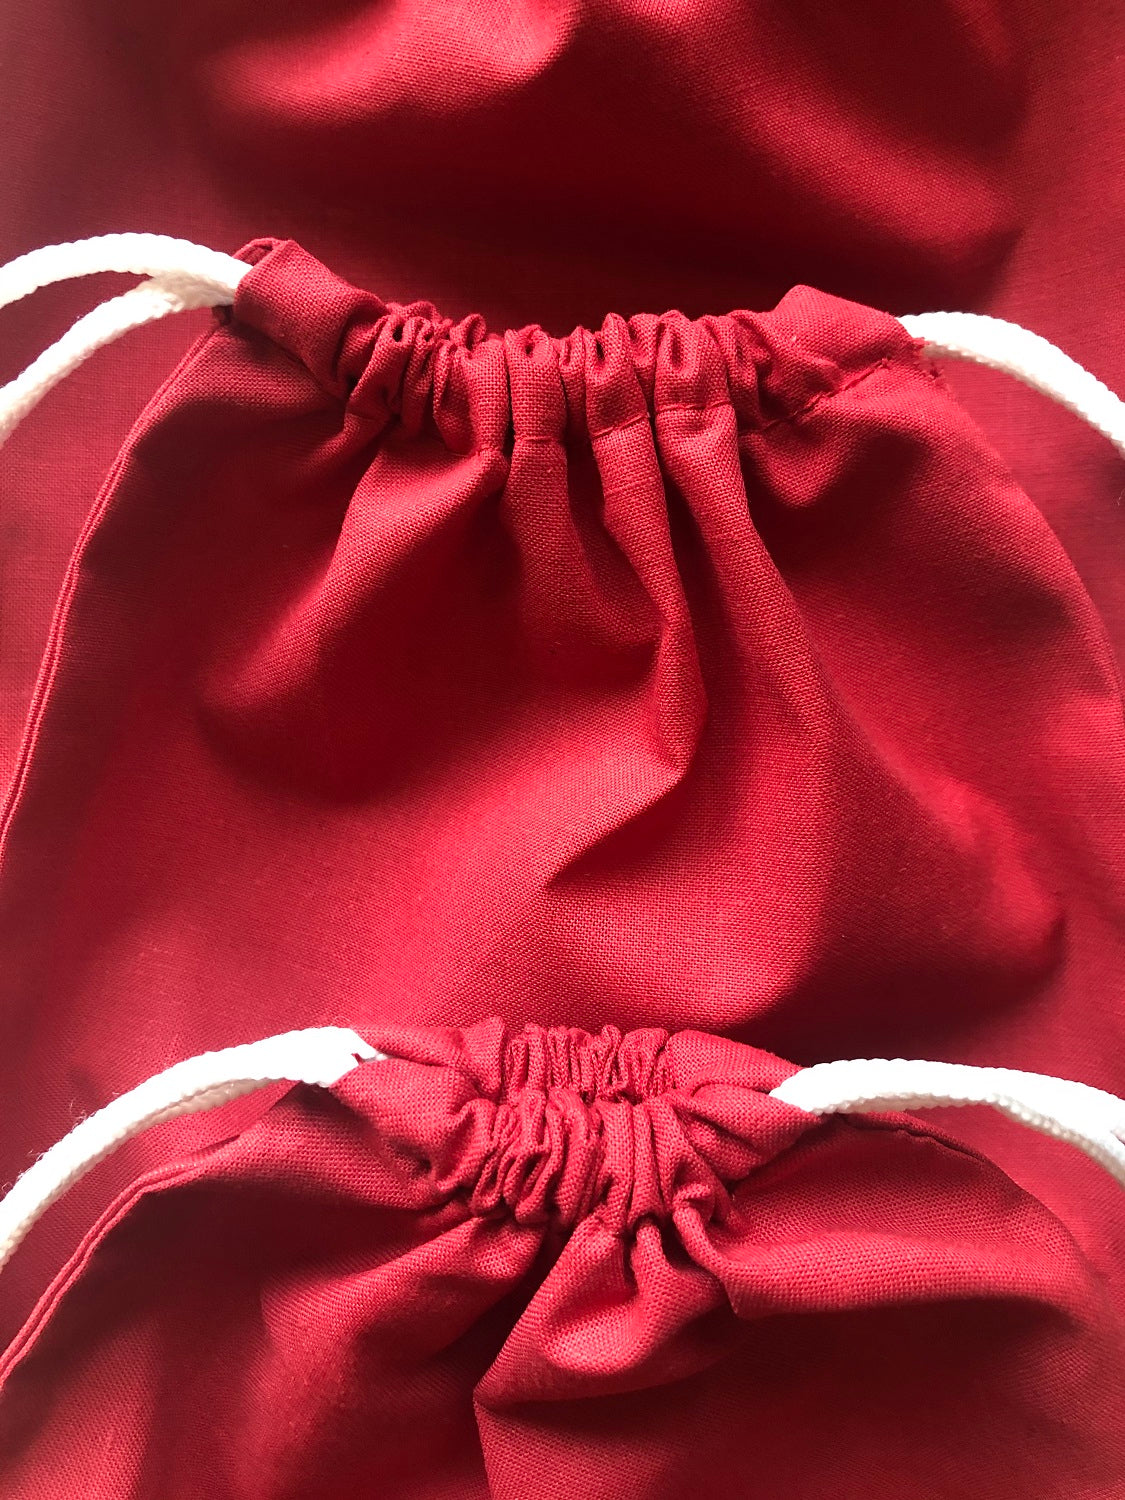 5x7 Inches Reusable Eco-Friendly Cotton Double Drawstring Bags Red Color